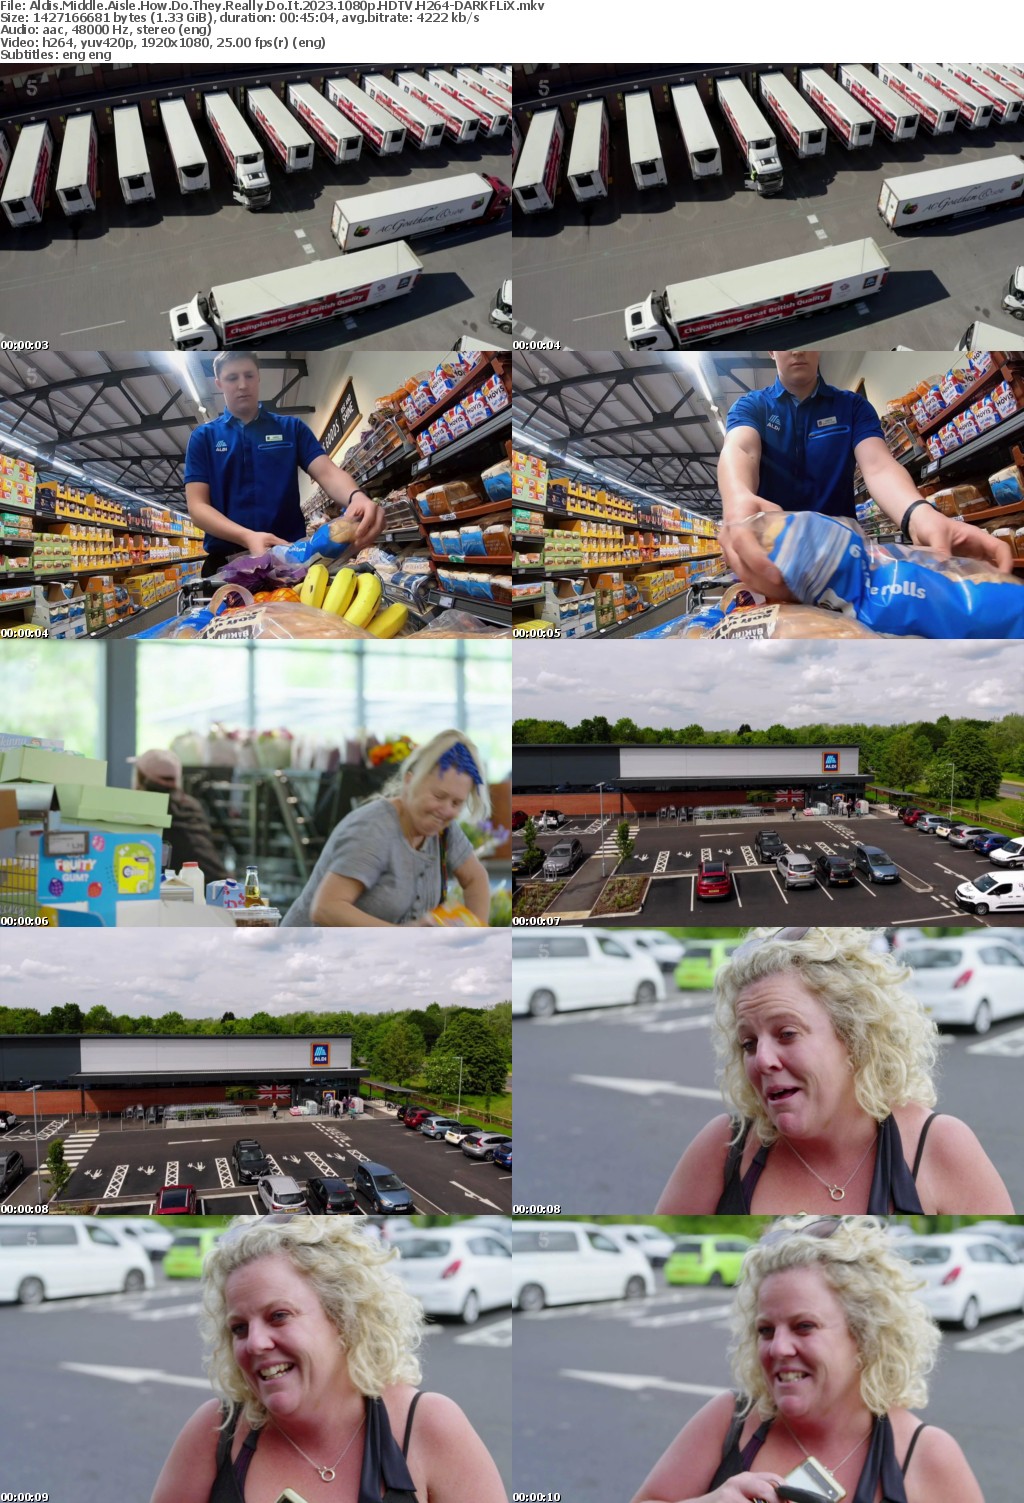 Aldis Middle Aisle How Do They Really Do It 2023 1080p HDTV H264-DARKFLiX